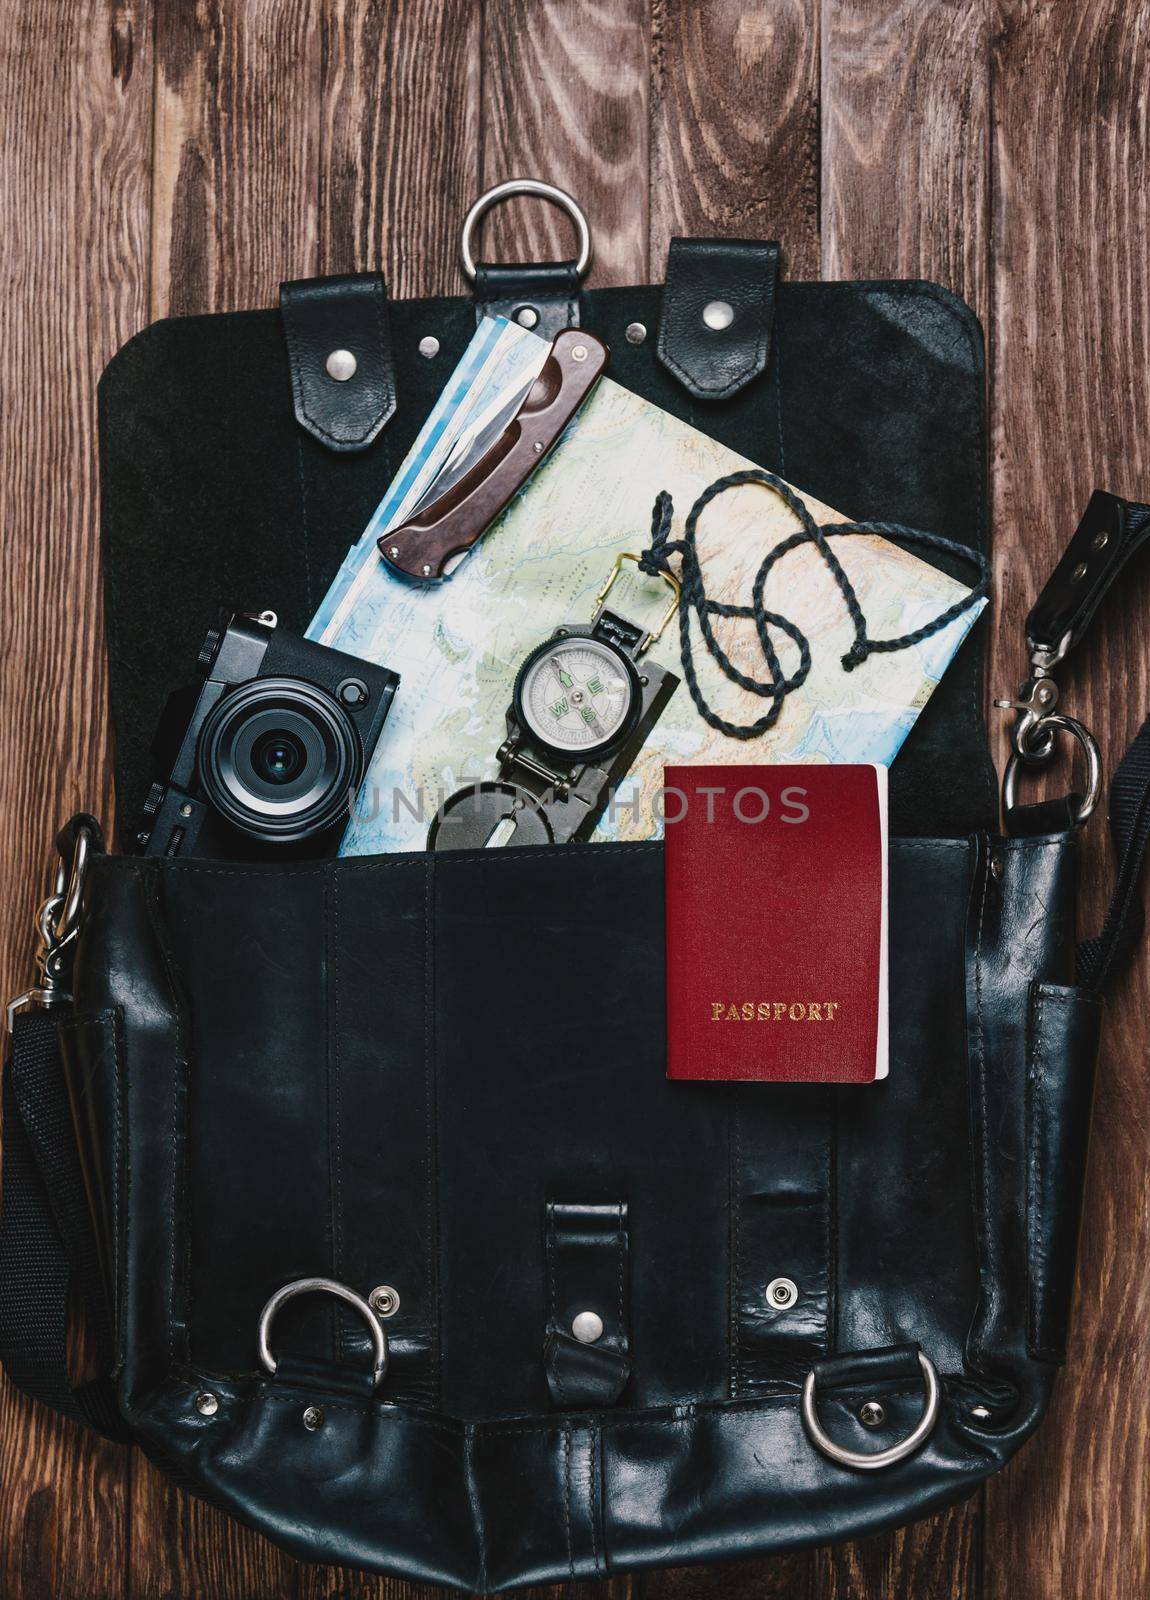 Travel objects in a suitcase on wooden background, top view.